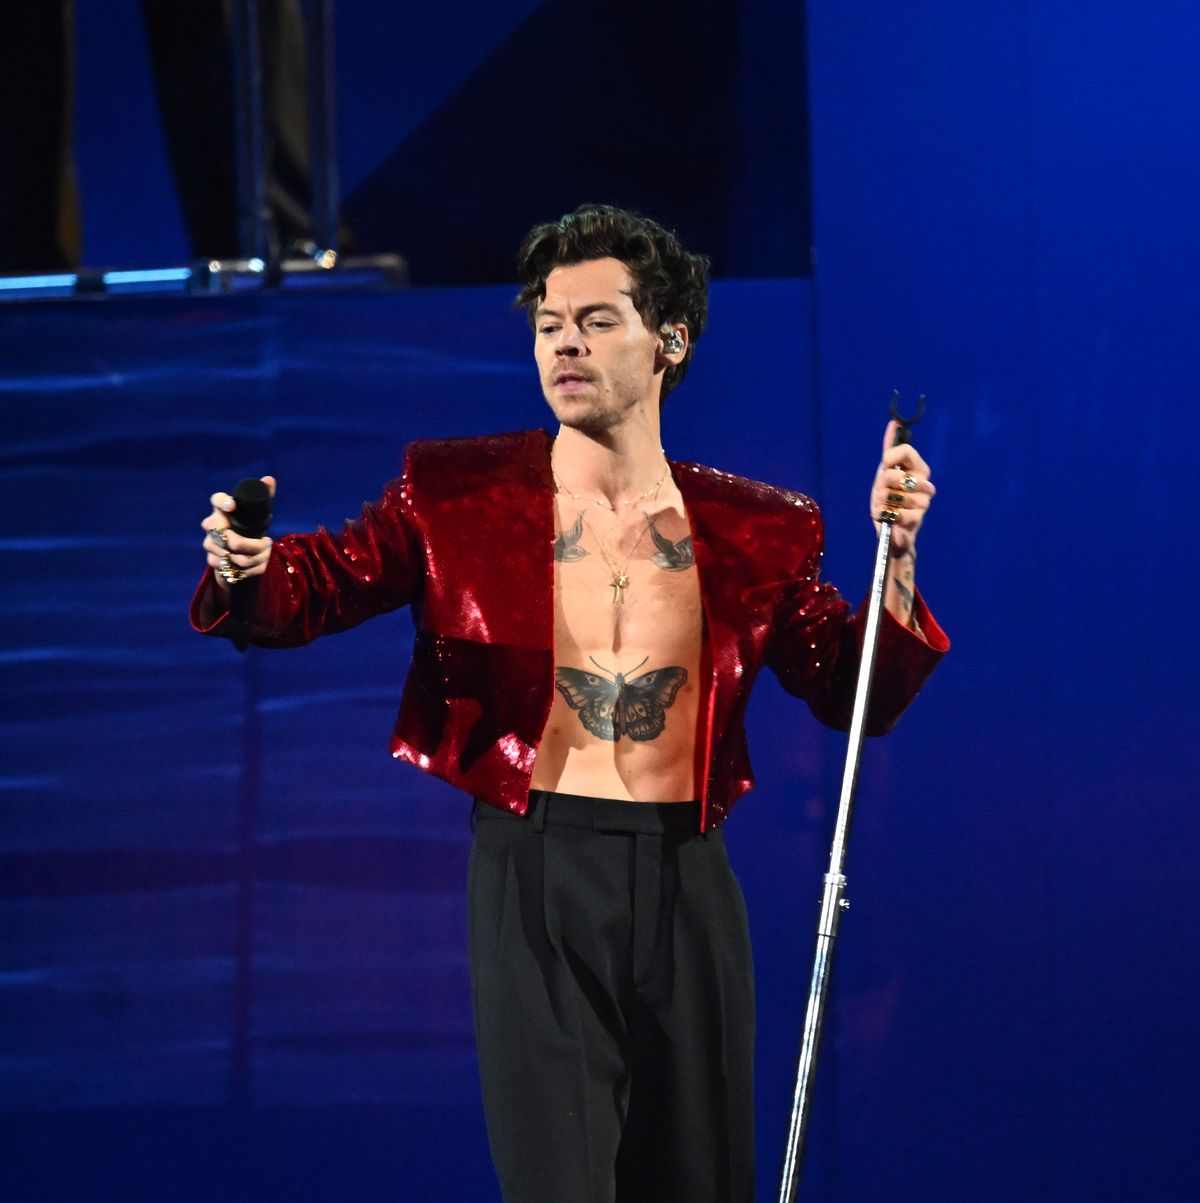 https://hips.hearstapps.com/hmg-prod/images/harry-styles-performs-on-stage-during-the-brit-awards-2023-news-photo-1689000162.jpg?crop=1.00xw:0.668xh;0,0&resize=1200:*